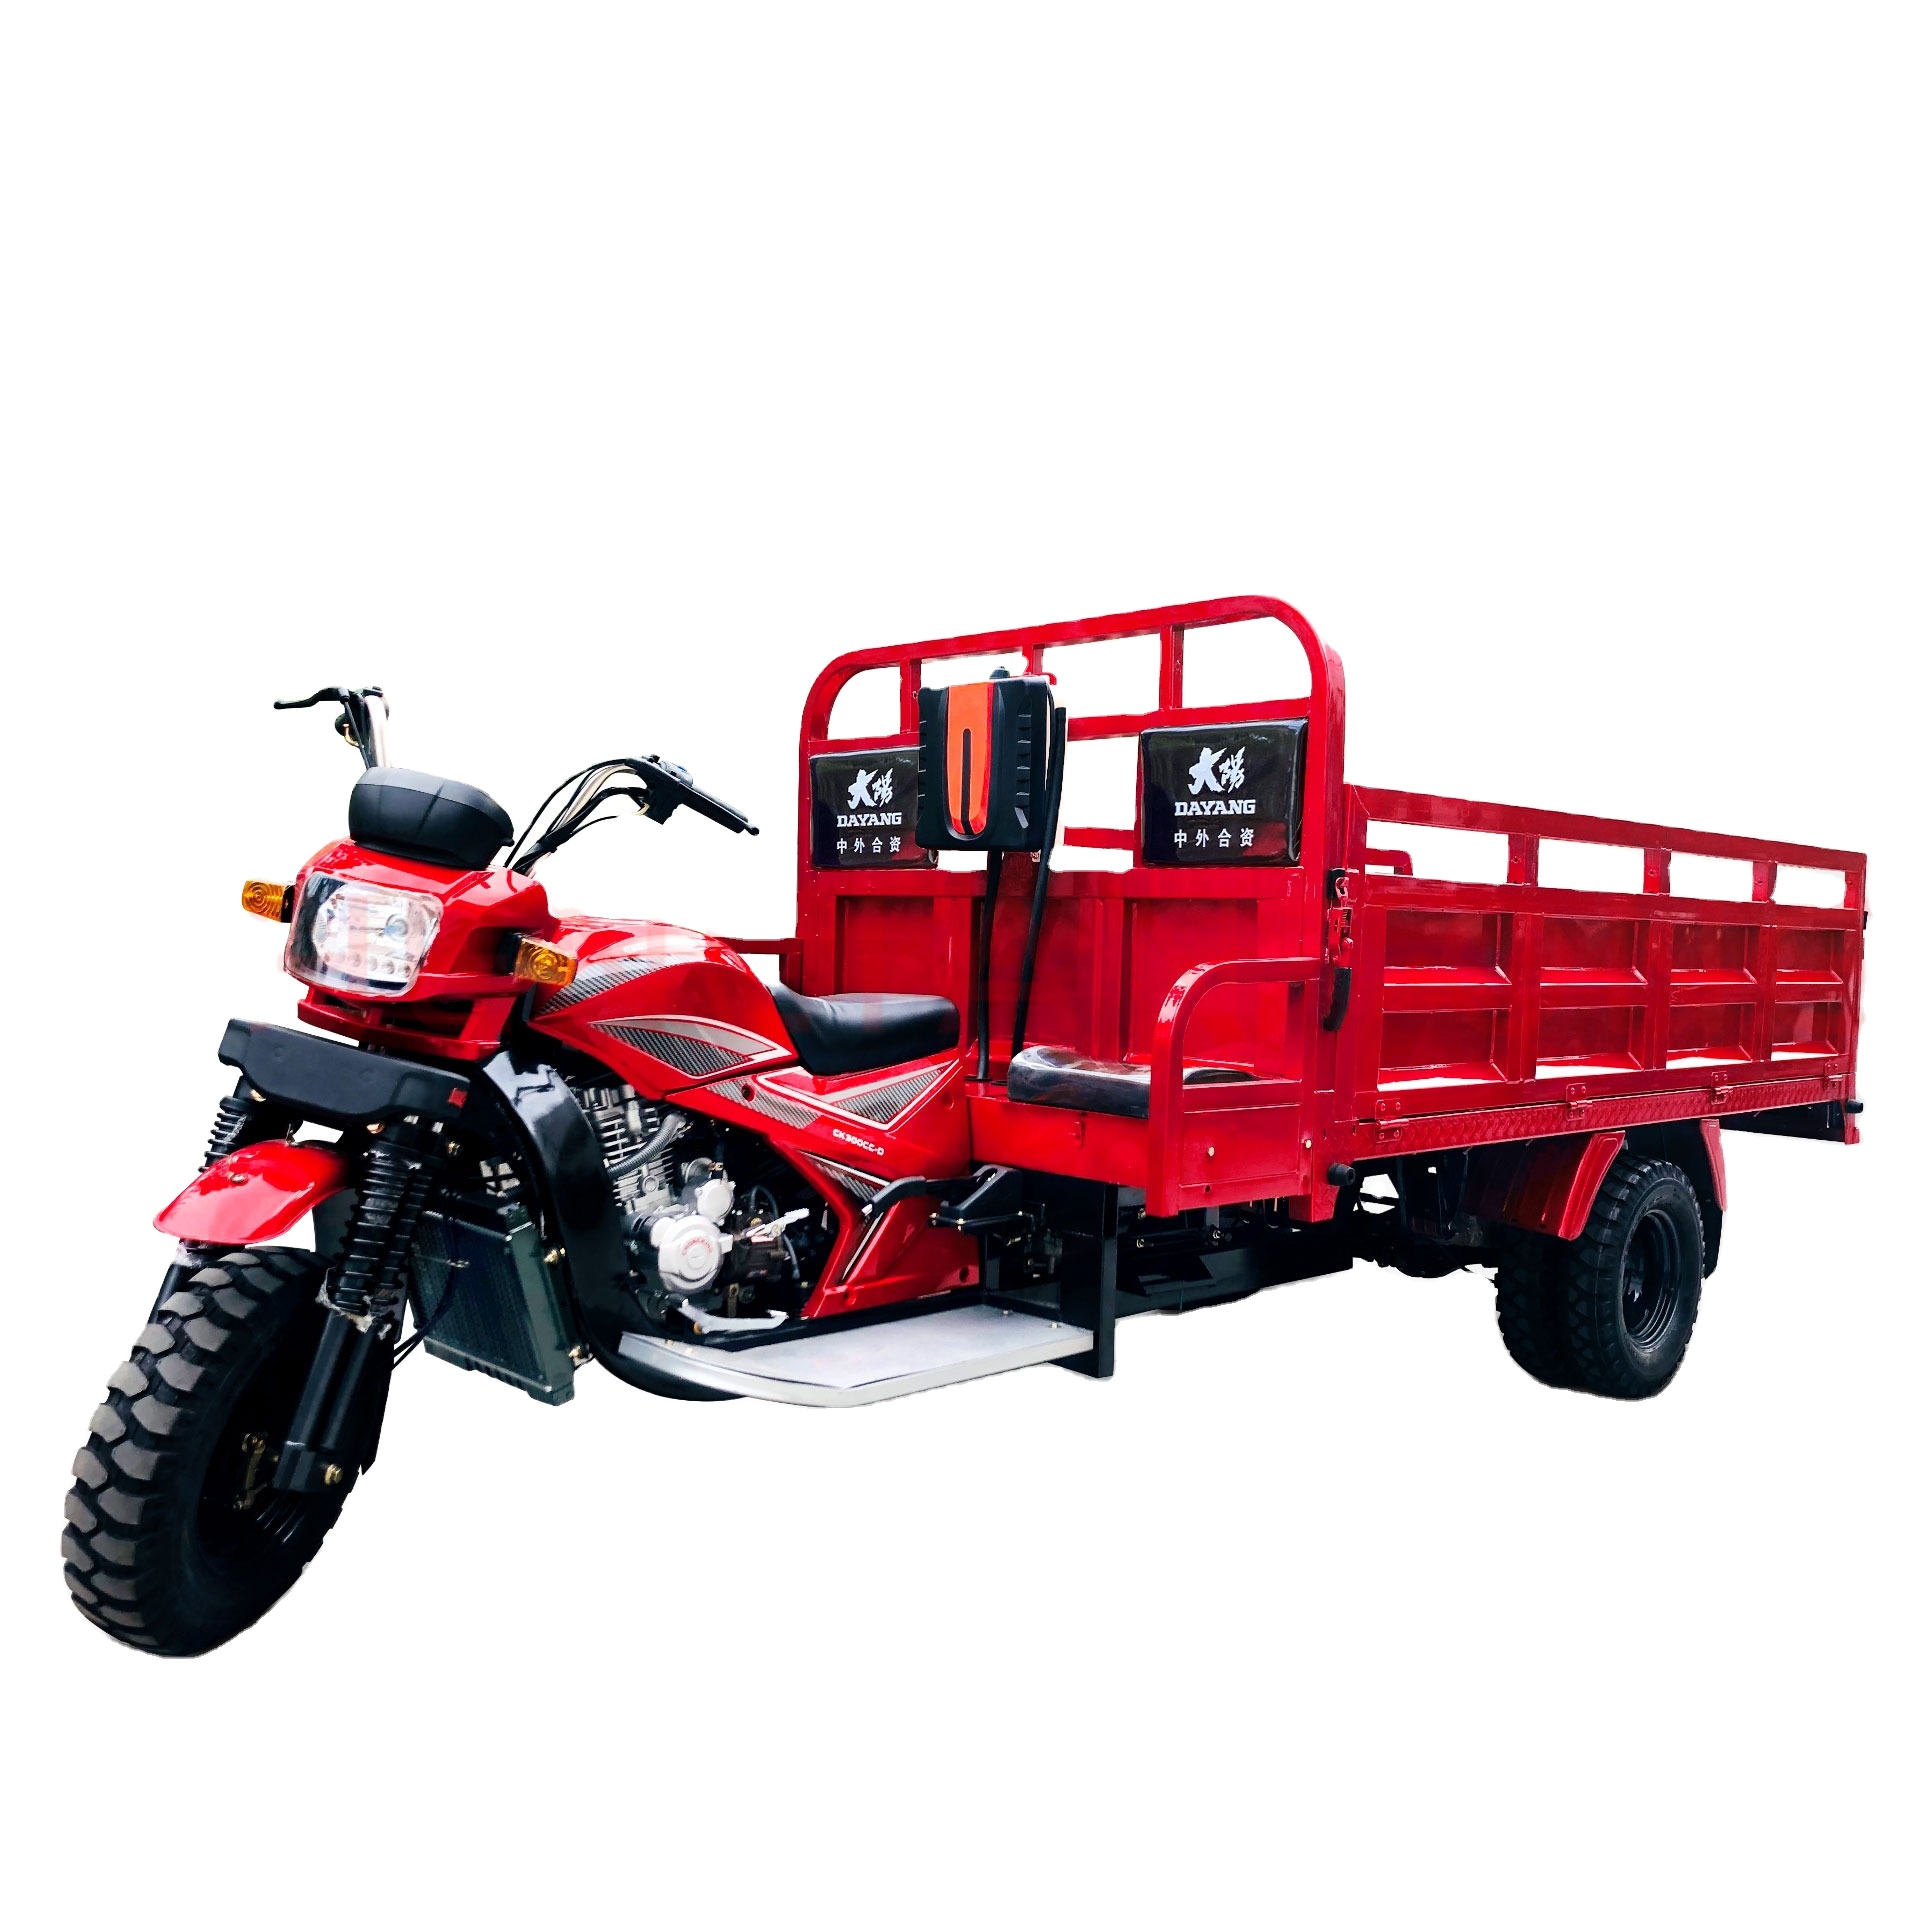 Togo adult Zongshen Lifan Loncin engine 150cc 200cc farming truck cargo tricycle  trailer motorcycle